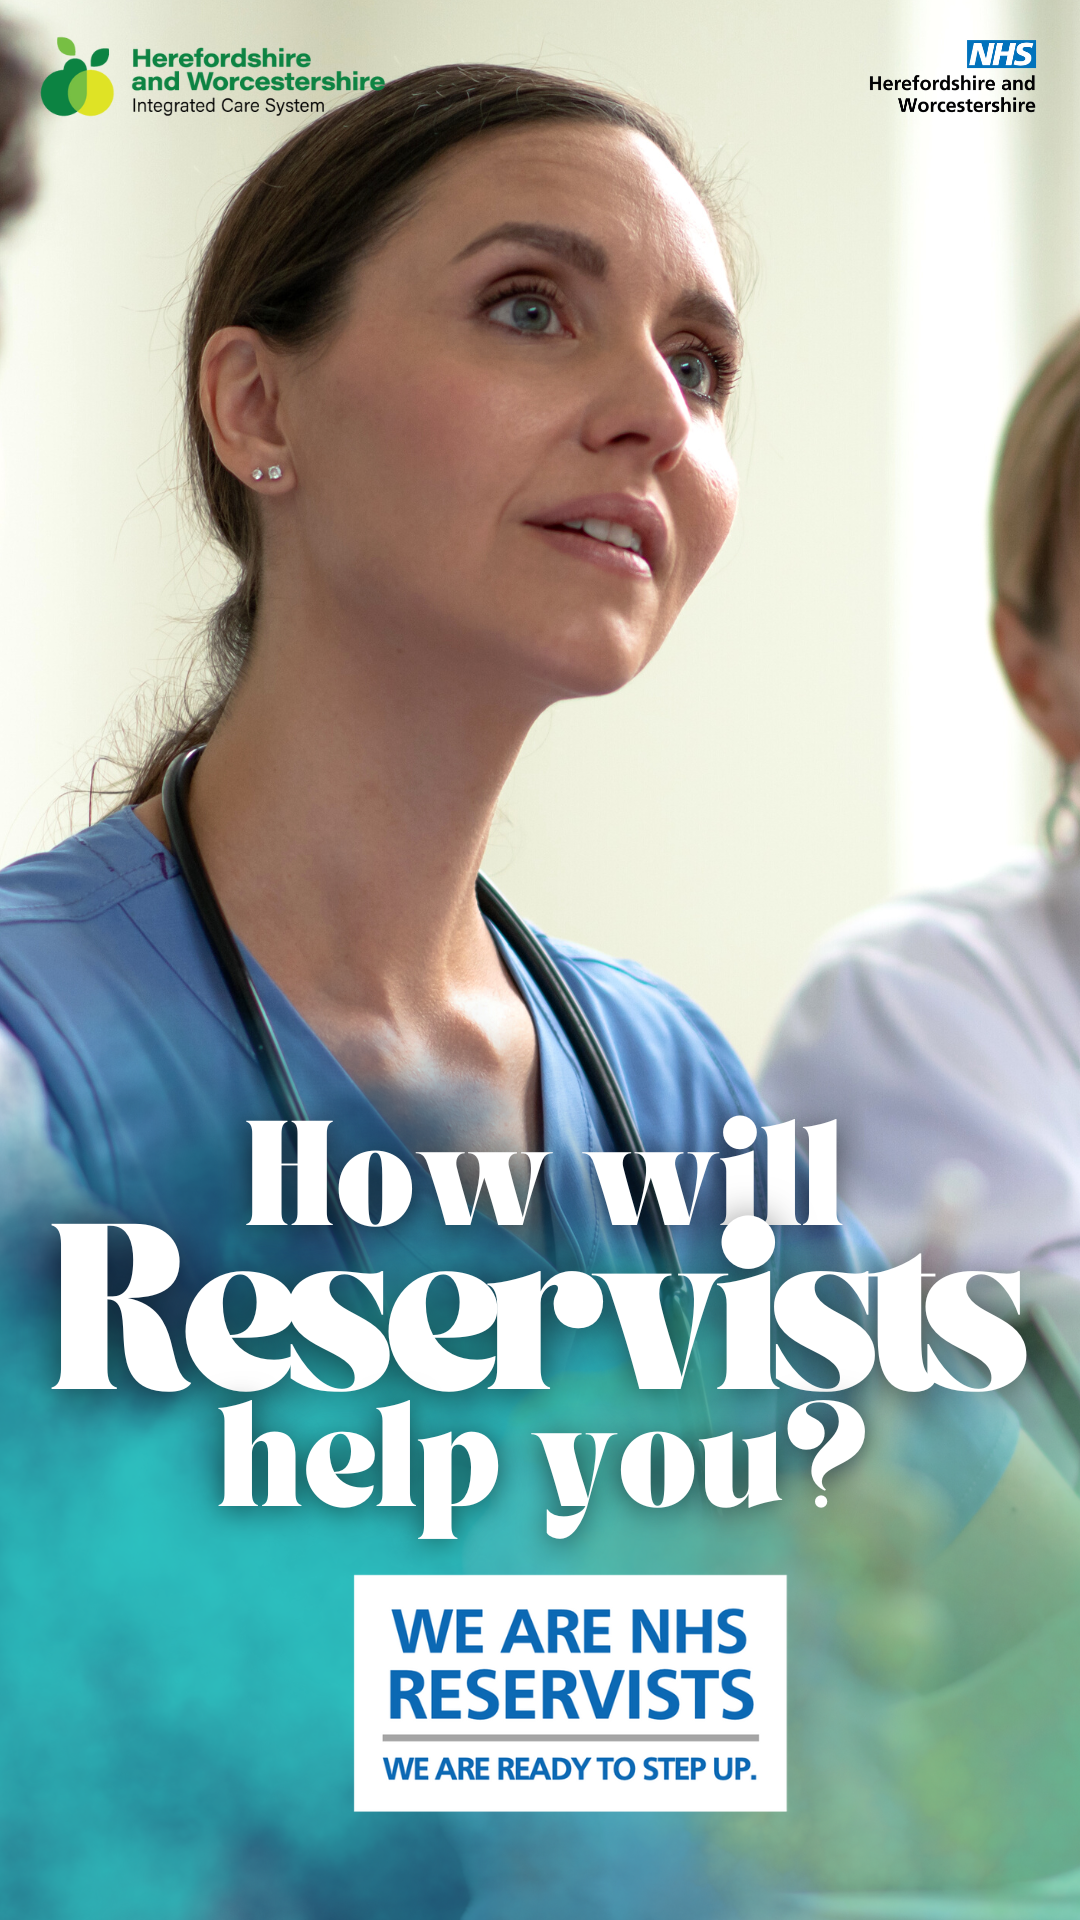 How will Reservists help you?